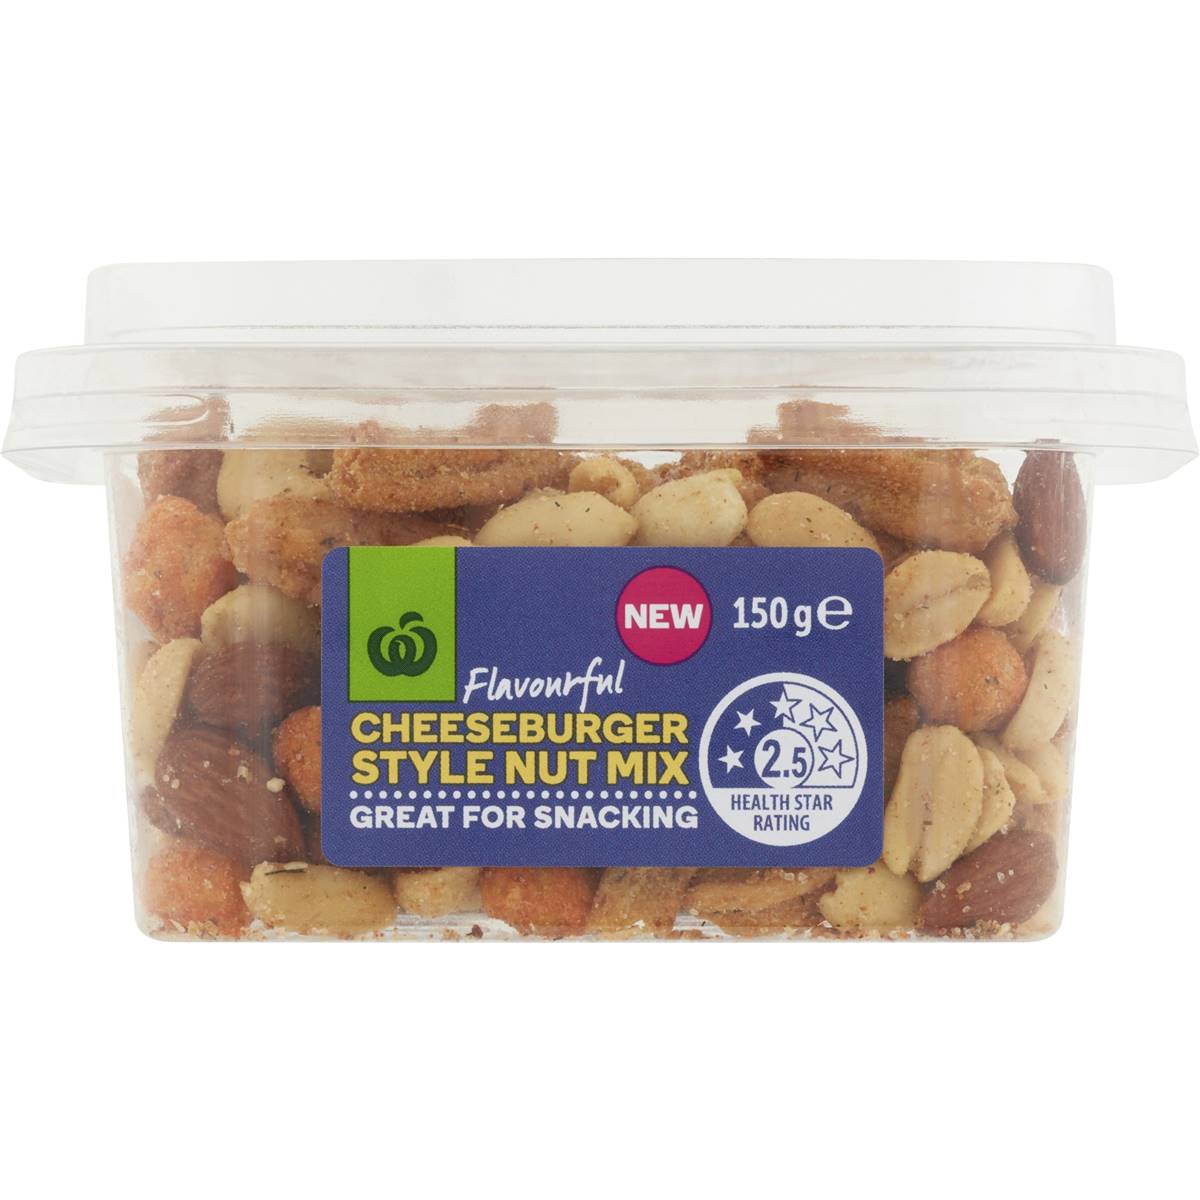 Woolworths Snack Pot Nut Mix Cheeseburger Style